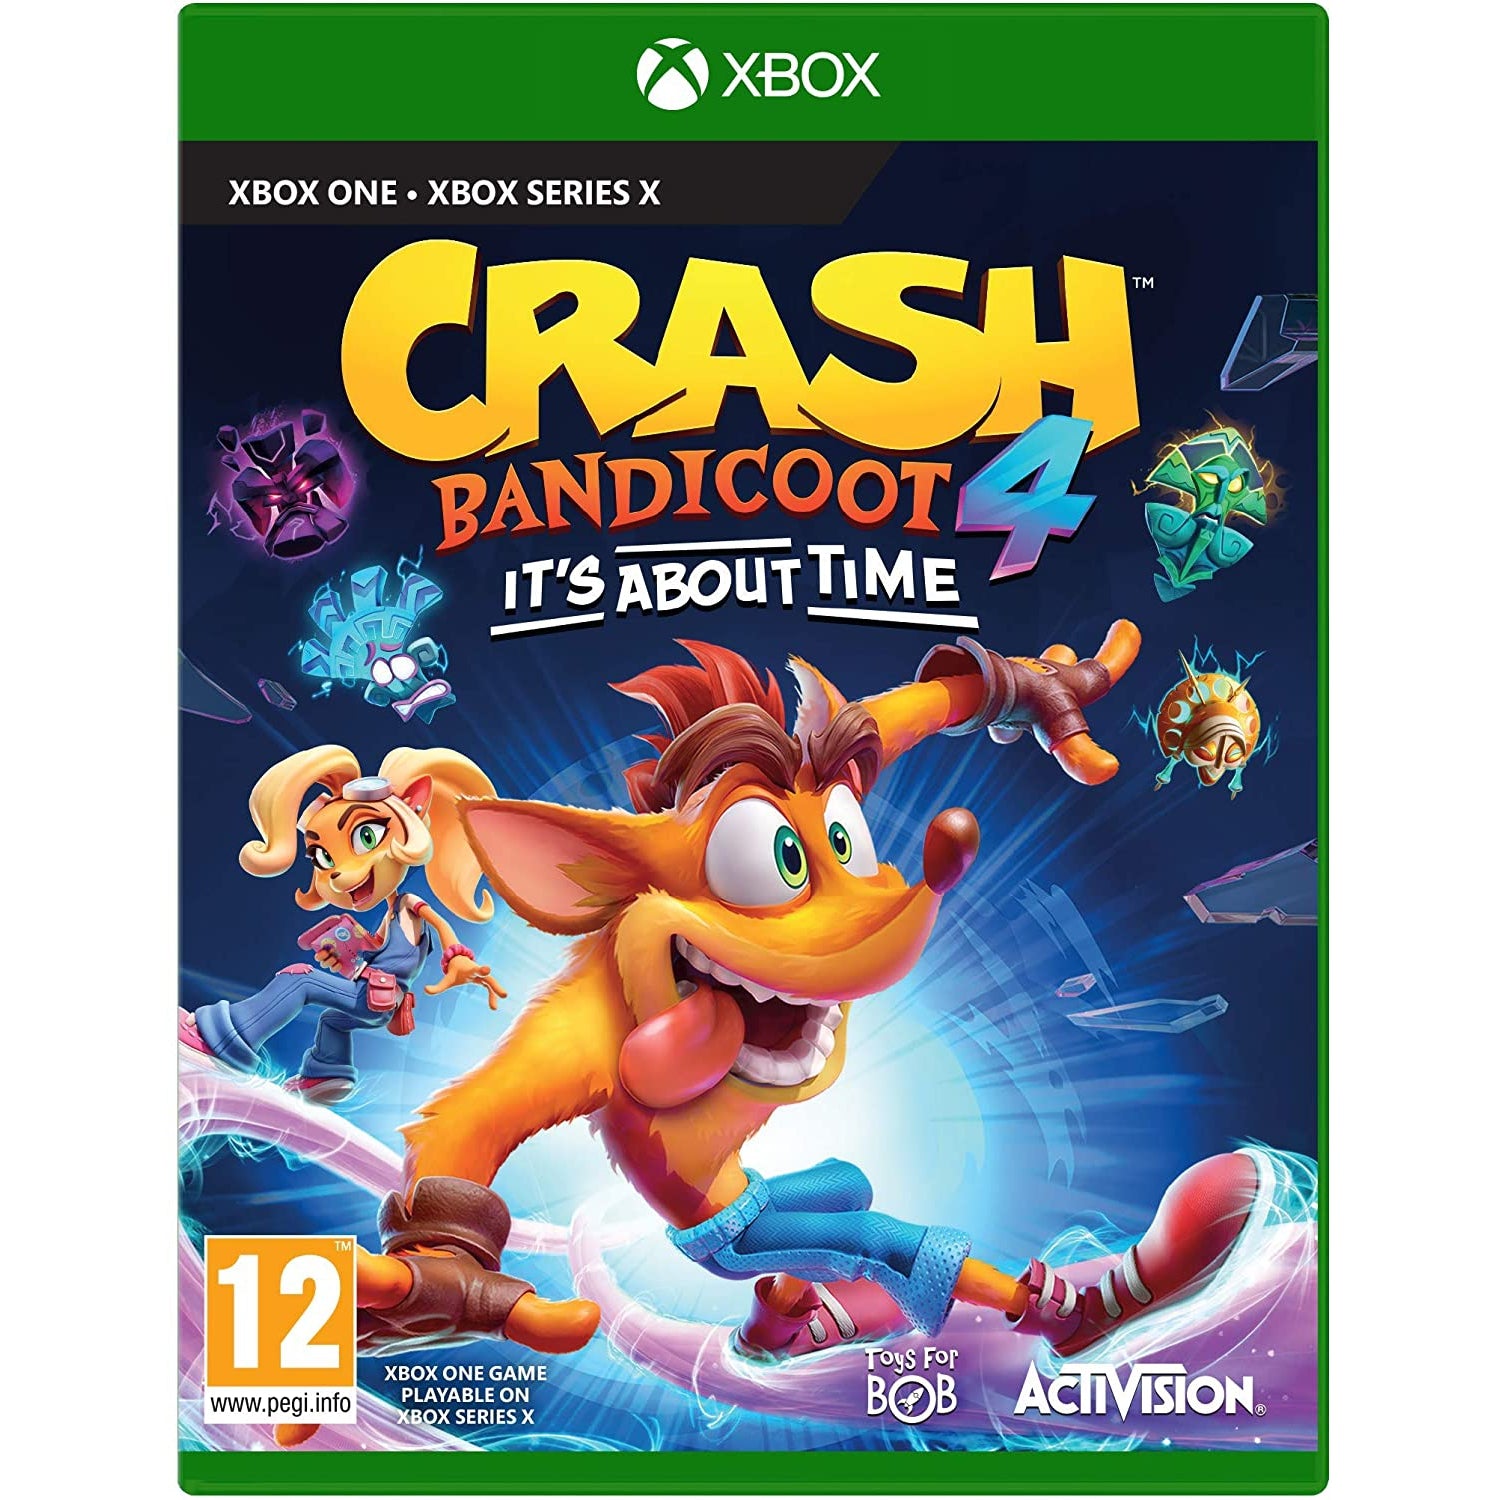 Crash Bandicoot 4 It’s About Time (Xbox One)